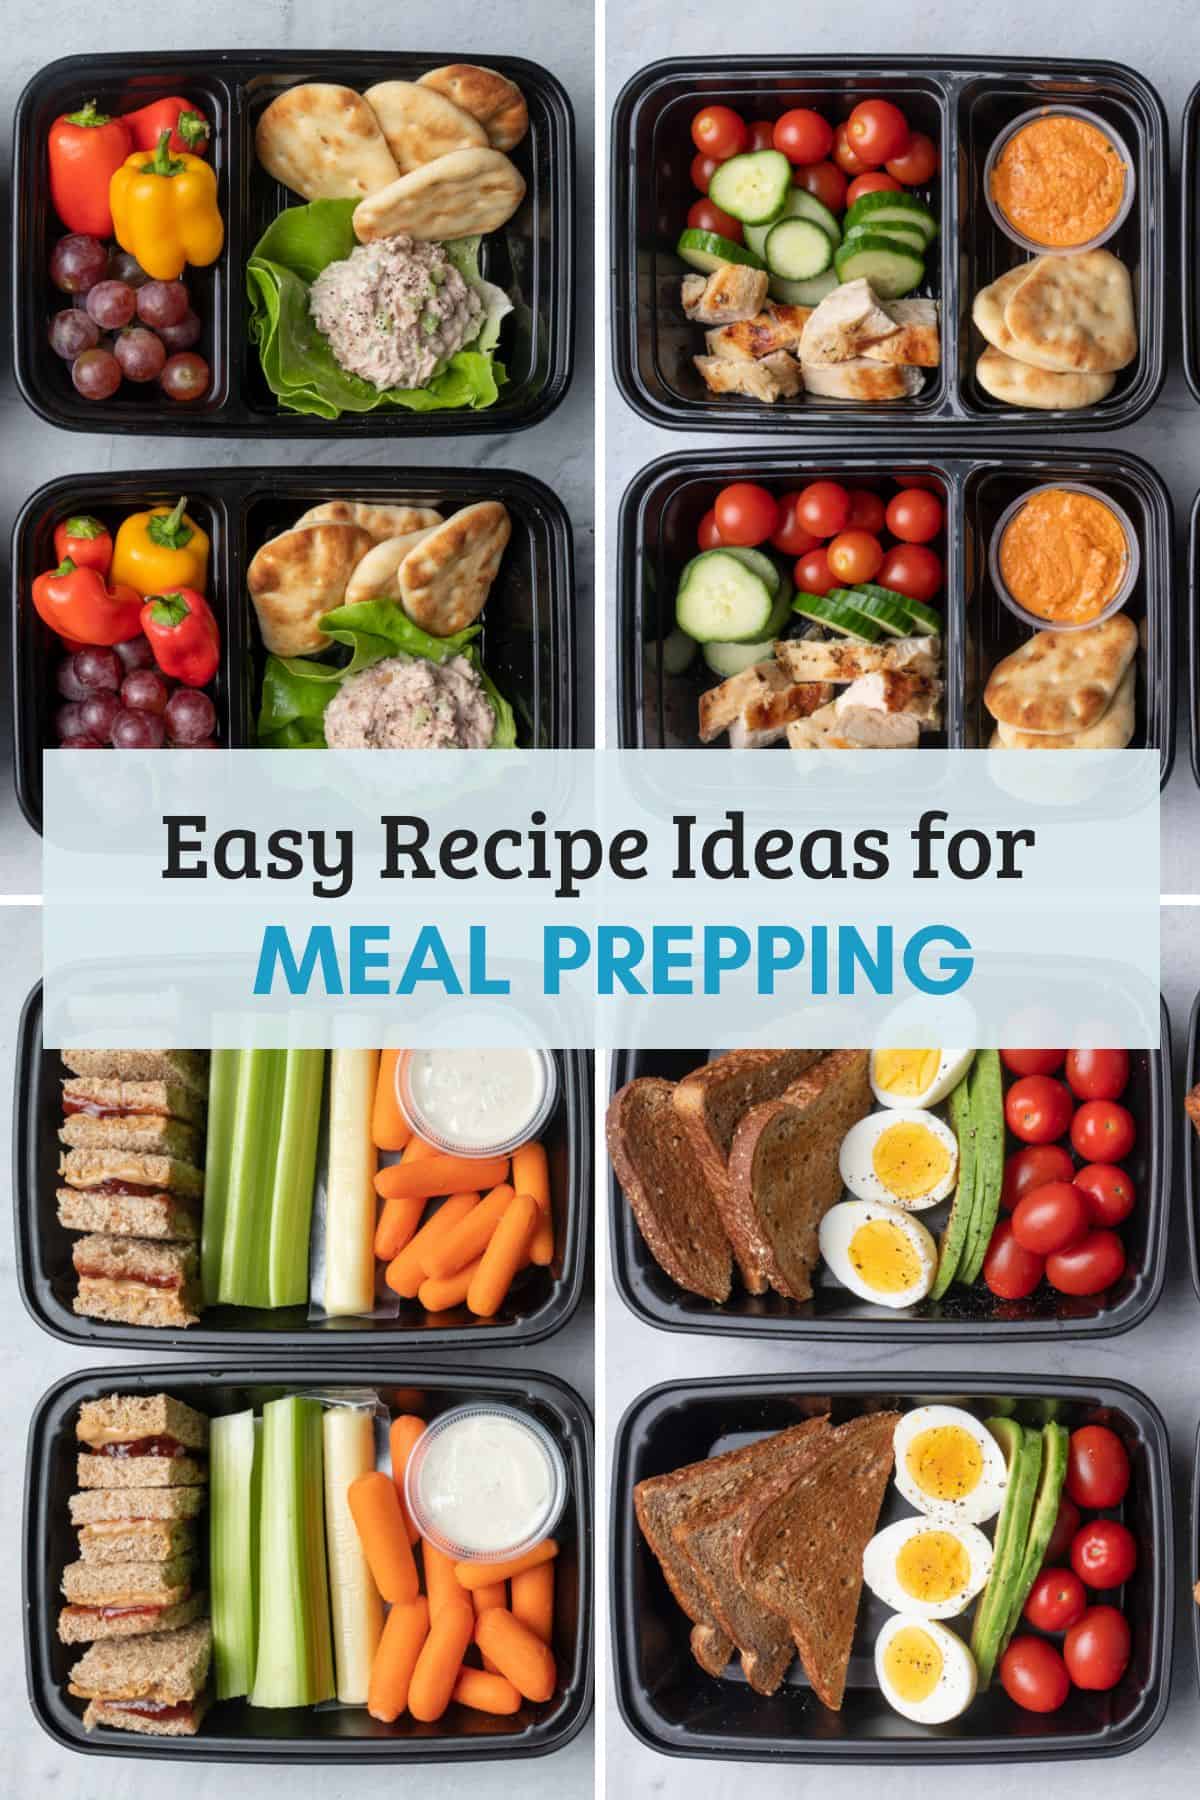 https://feelgoodfoodie.net/wp-content/uploads/2023/04/RoundUp_Meal_Prep_Recipes.jpg